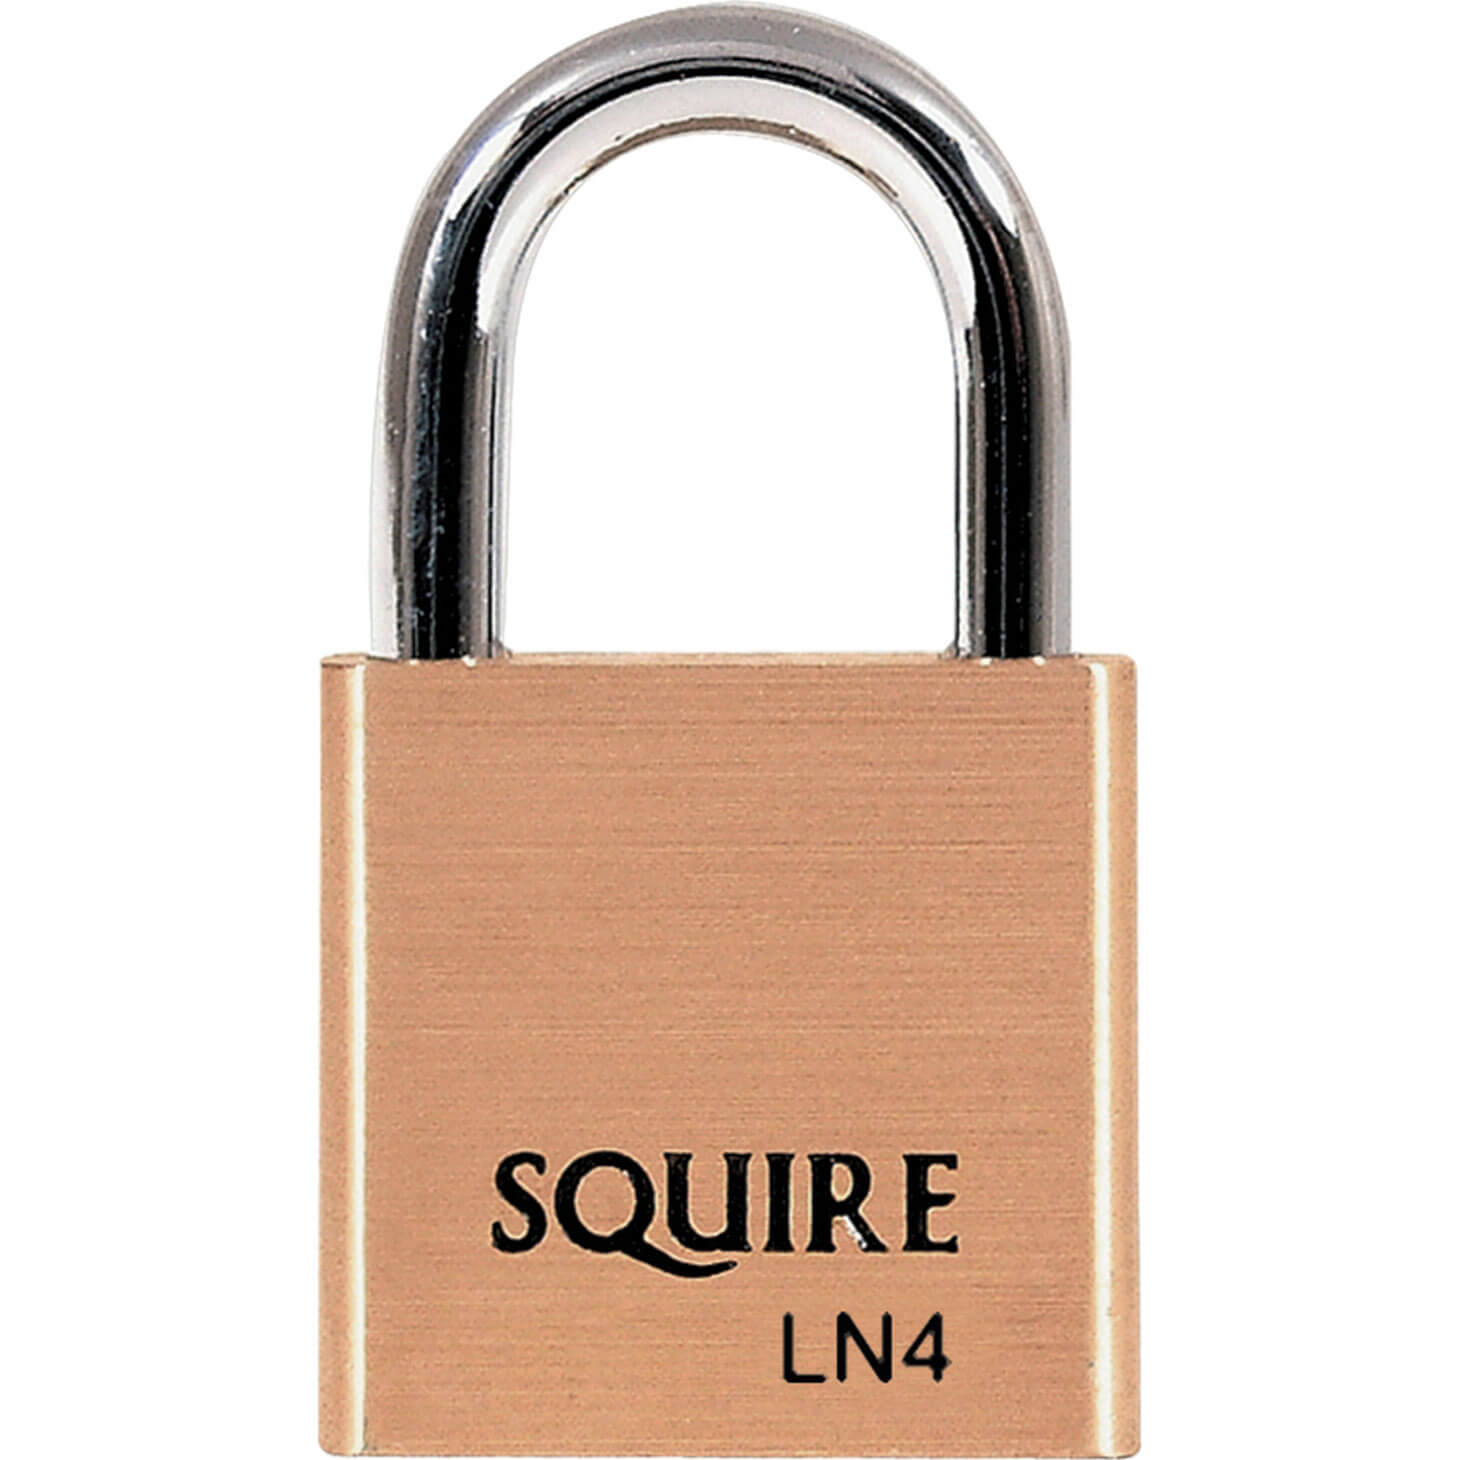 Image of Squire Lion Series Brass Padlock 40mm Standard